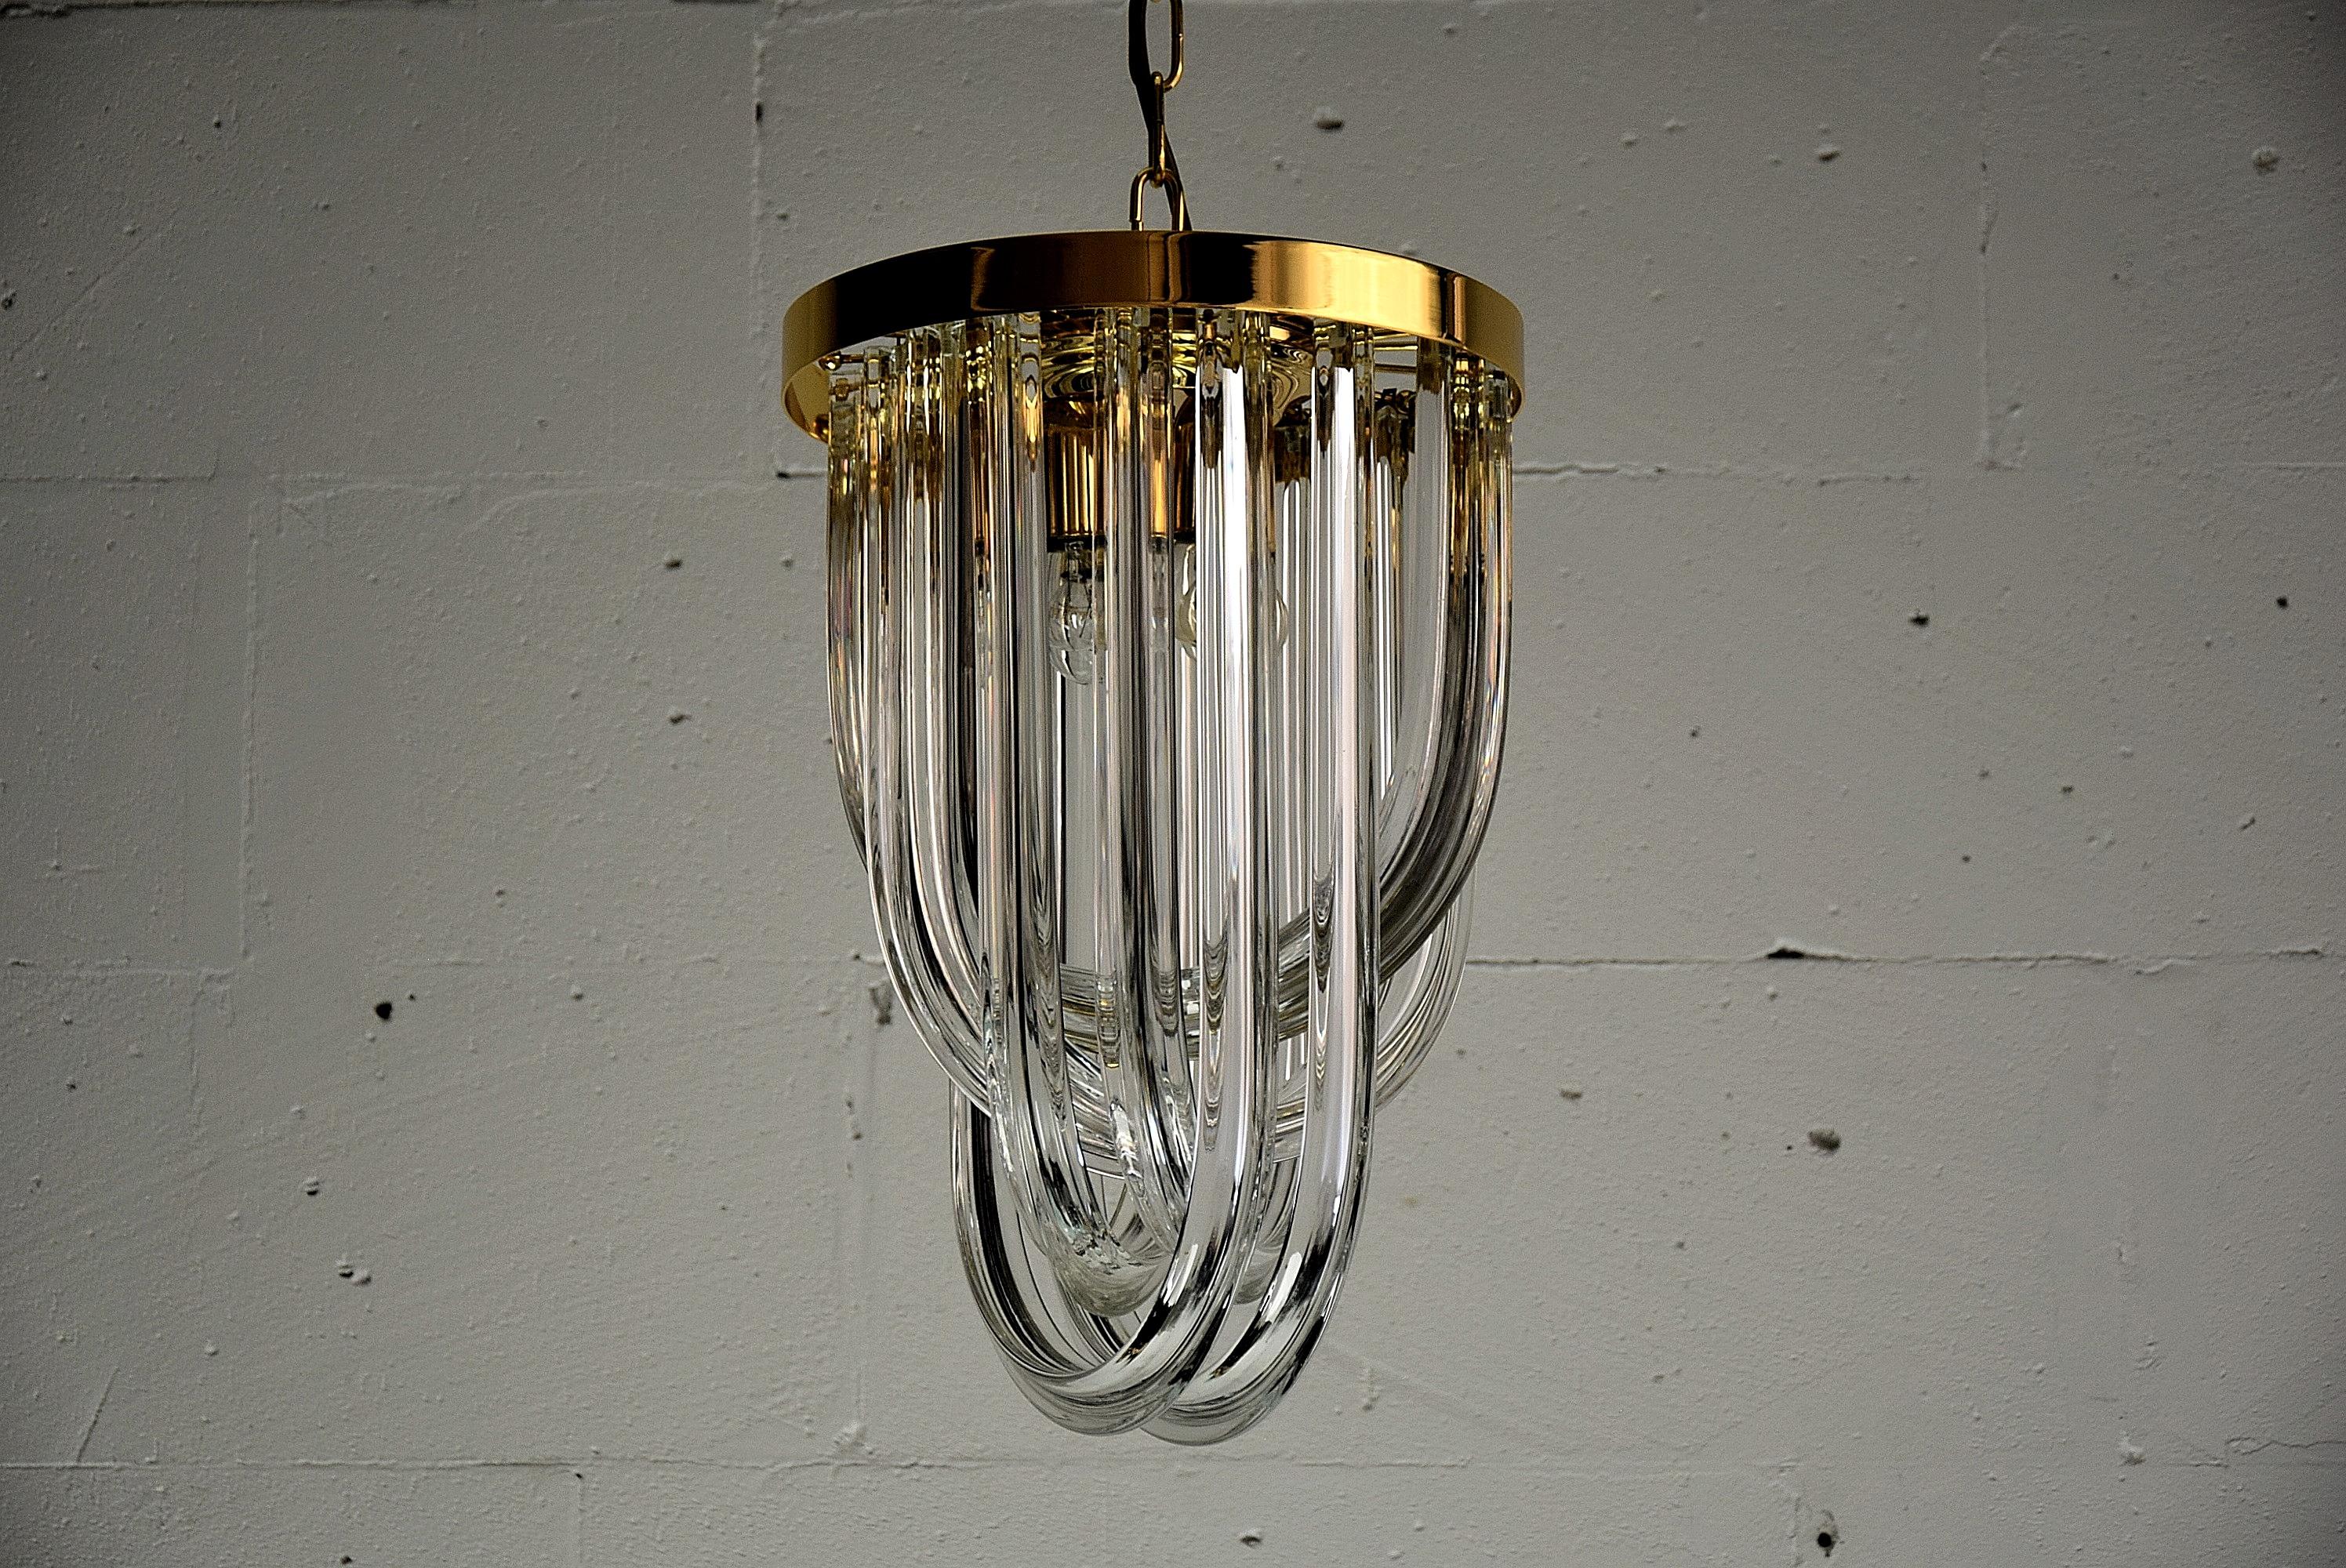 A stylish and classy Italian Hollywood Regency pendant Venini light, circa 1990's. This beauty is made of pairwise curved crystal Murano glasses in different lengths and a gold-plated brass frame. Perfect Condition.

The height of the body without